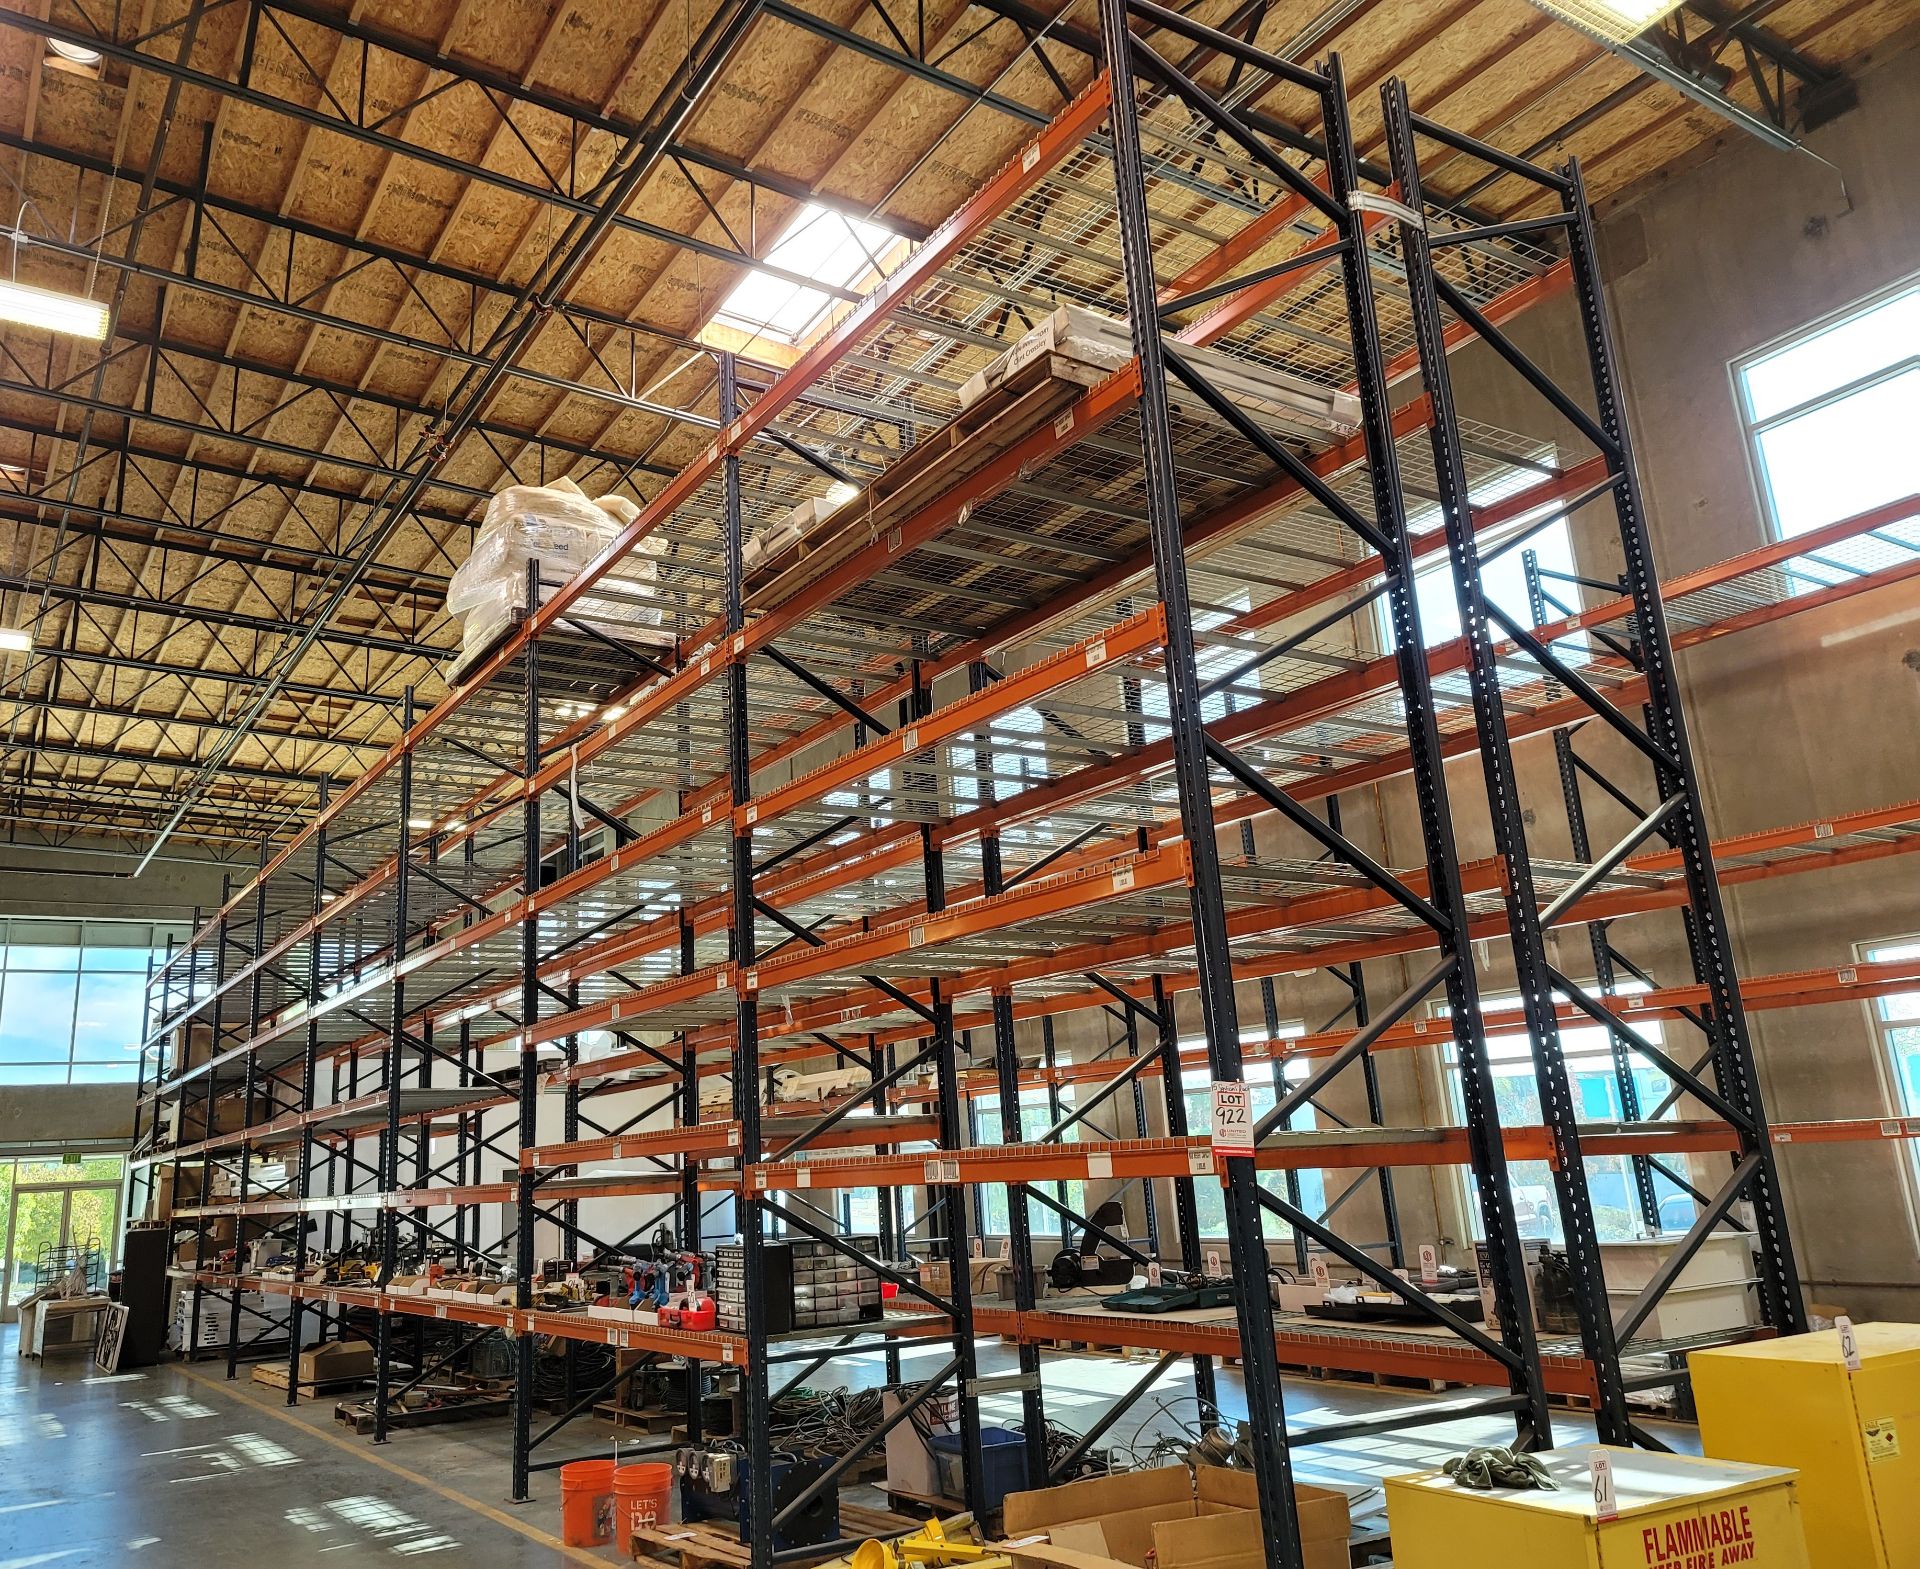 LOT - (15) SECTIONS OF PALLET RACK, 10' BEAMS, 20' UPRIGHTS, CONTENTS NOT INCLUDED - Image 2 of 4